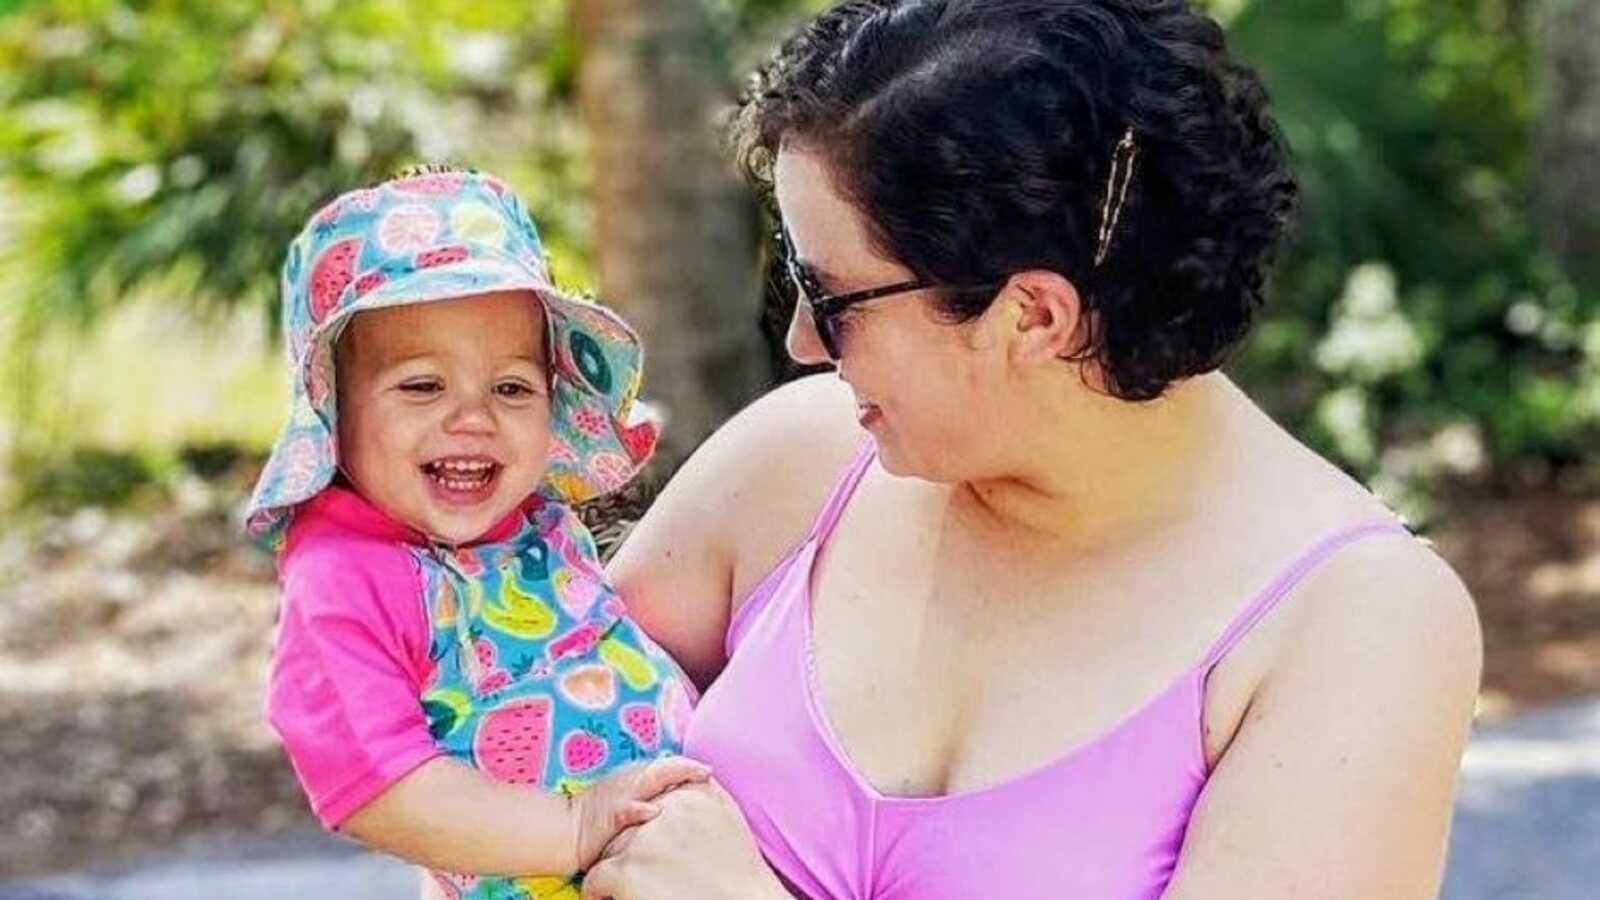 Mom and daughter enjoy the day out in the sun together, both wearing bathing suits